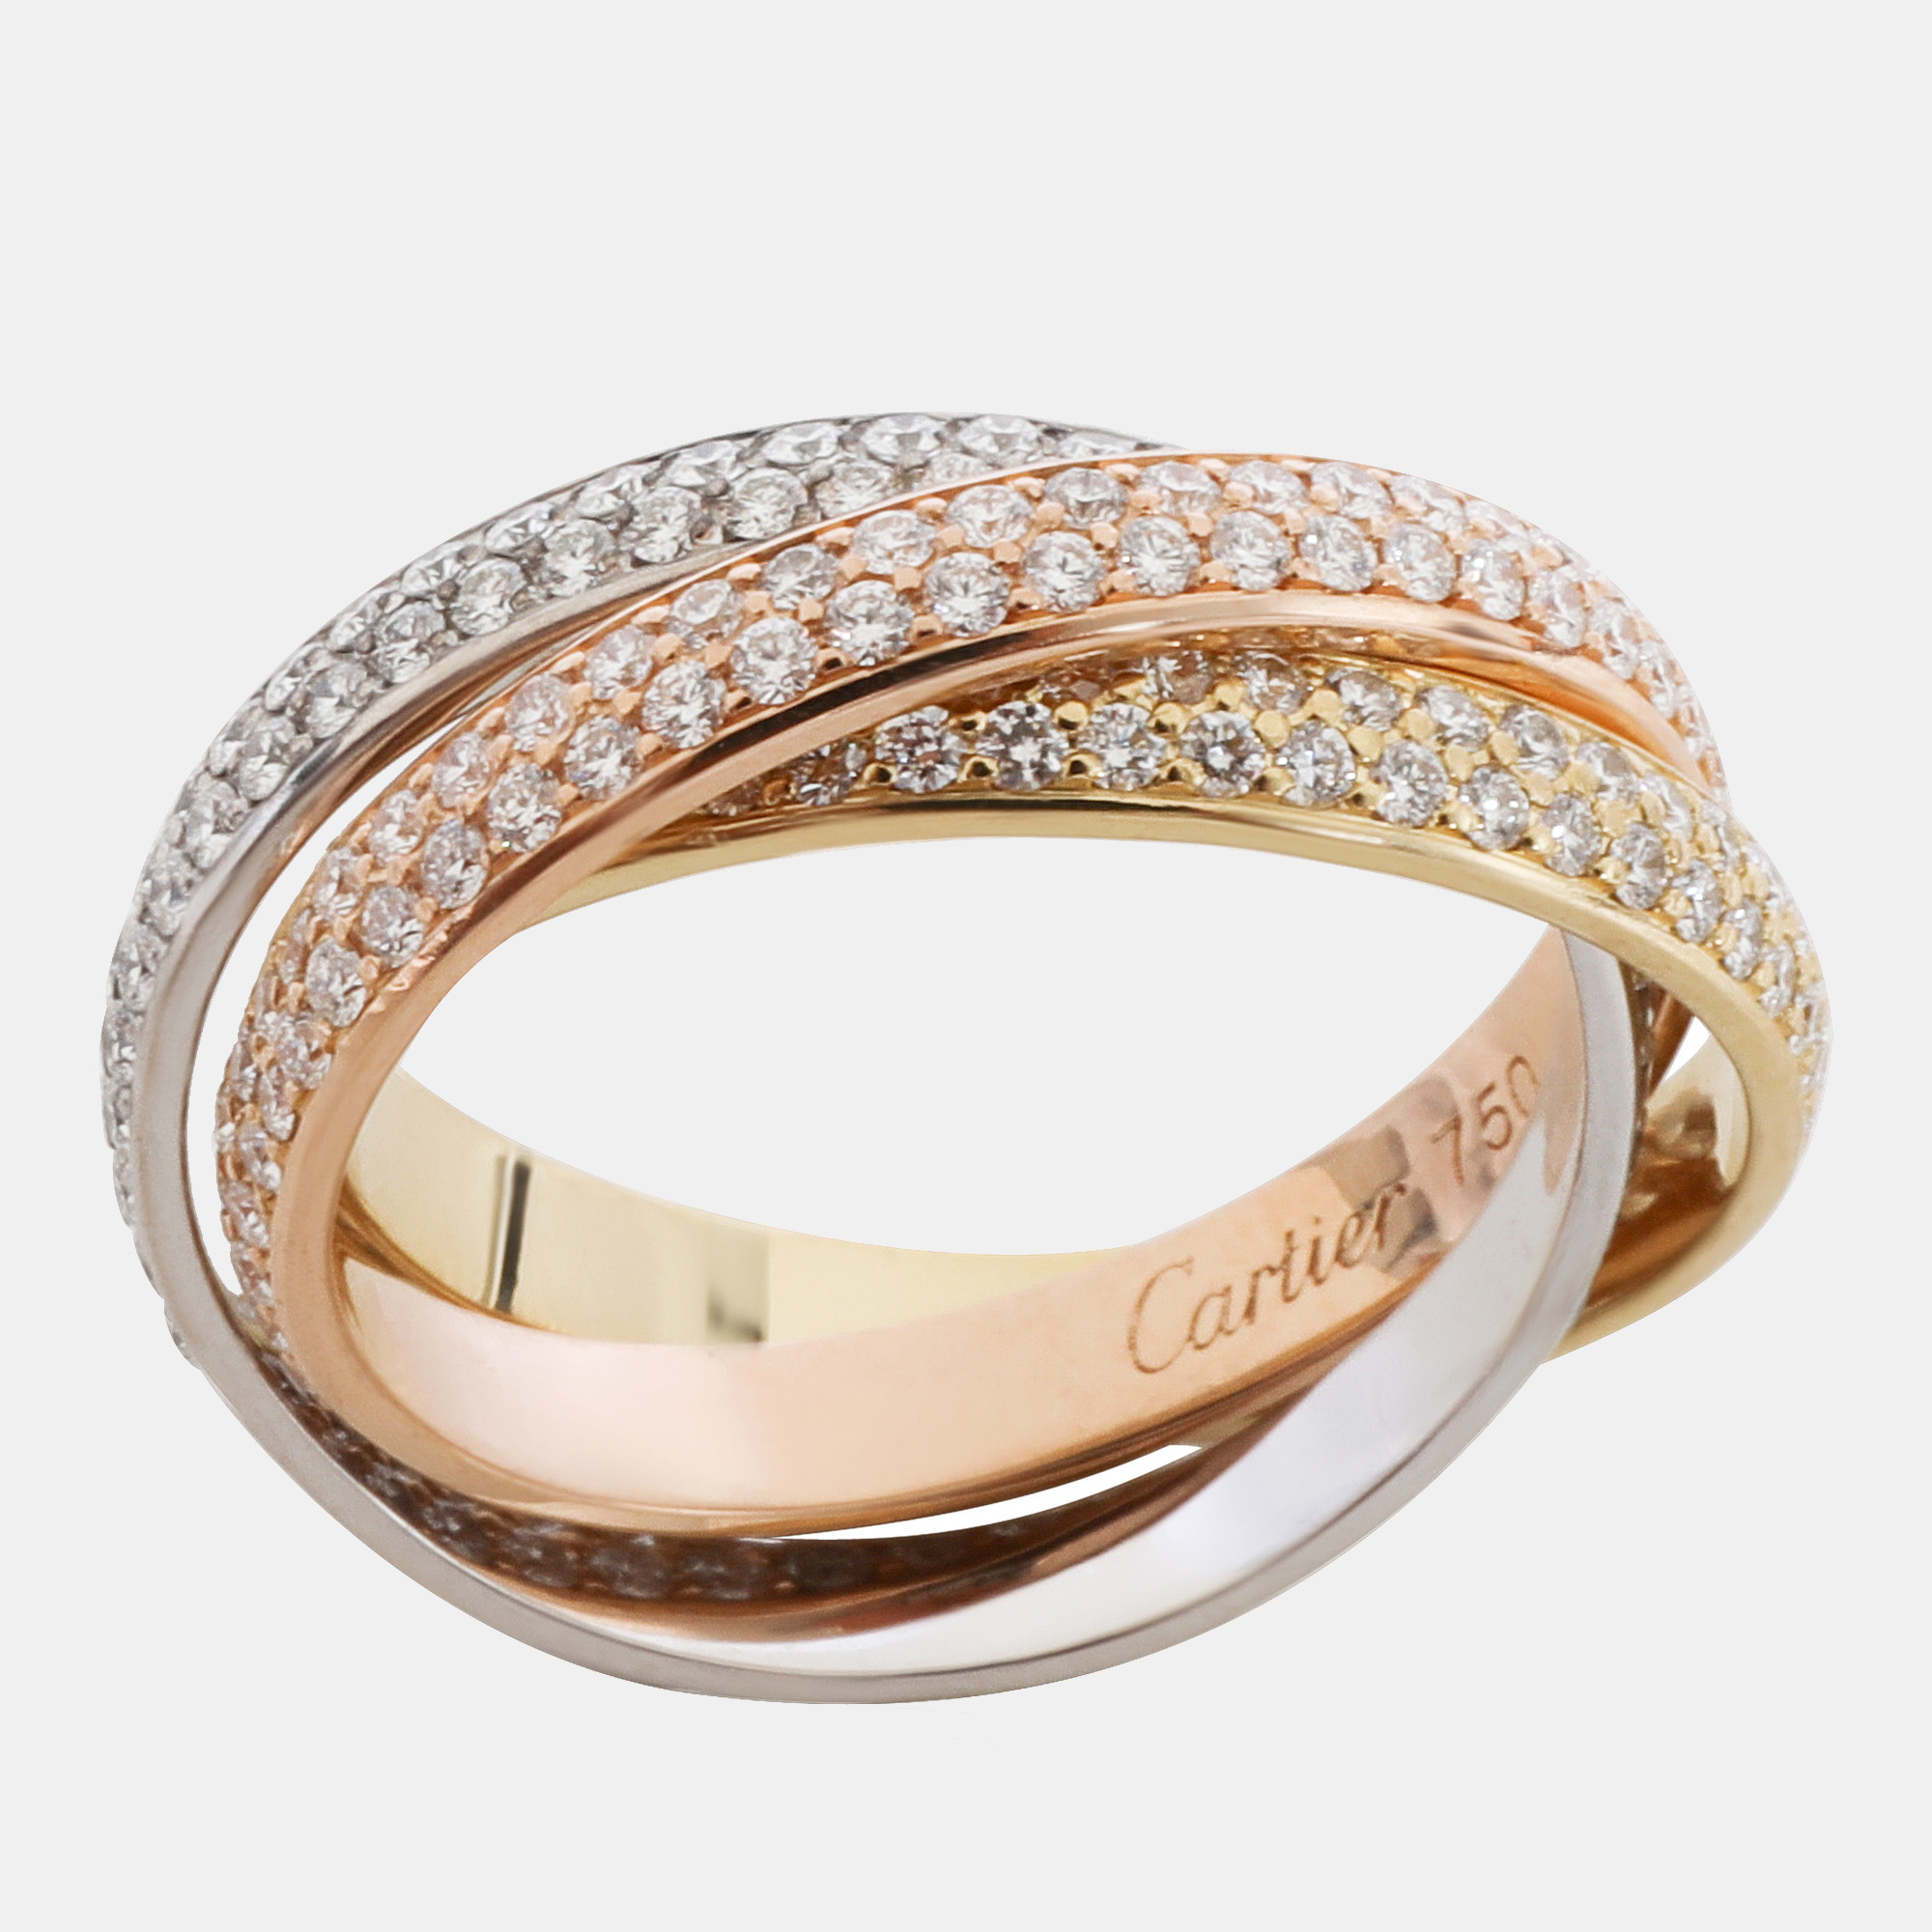 Cartier Trinity Diamond Band In 18K 3 Tone Gold 1.35 CTW Ring US 6